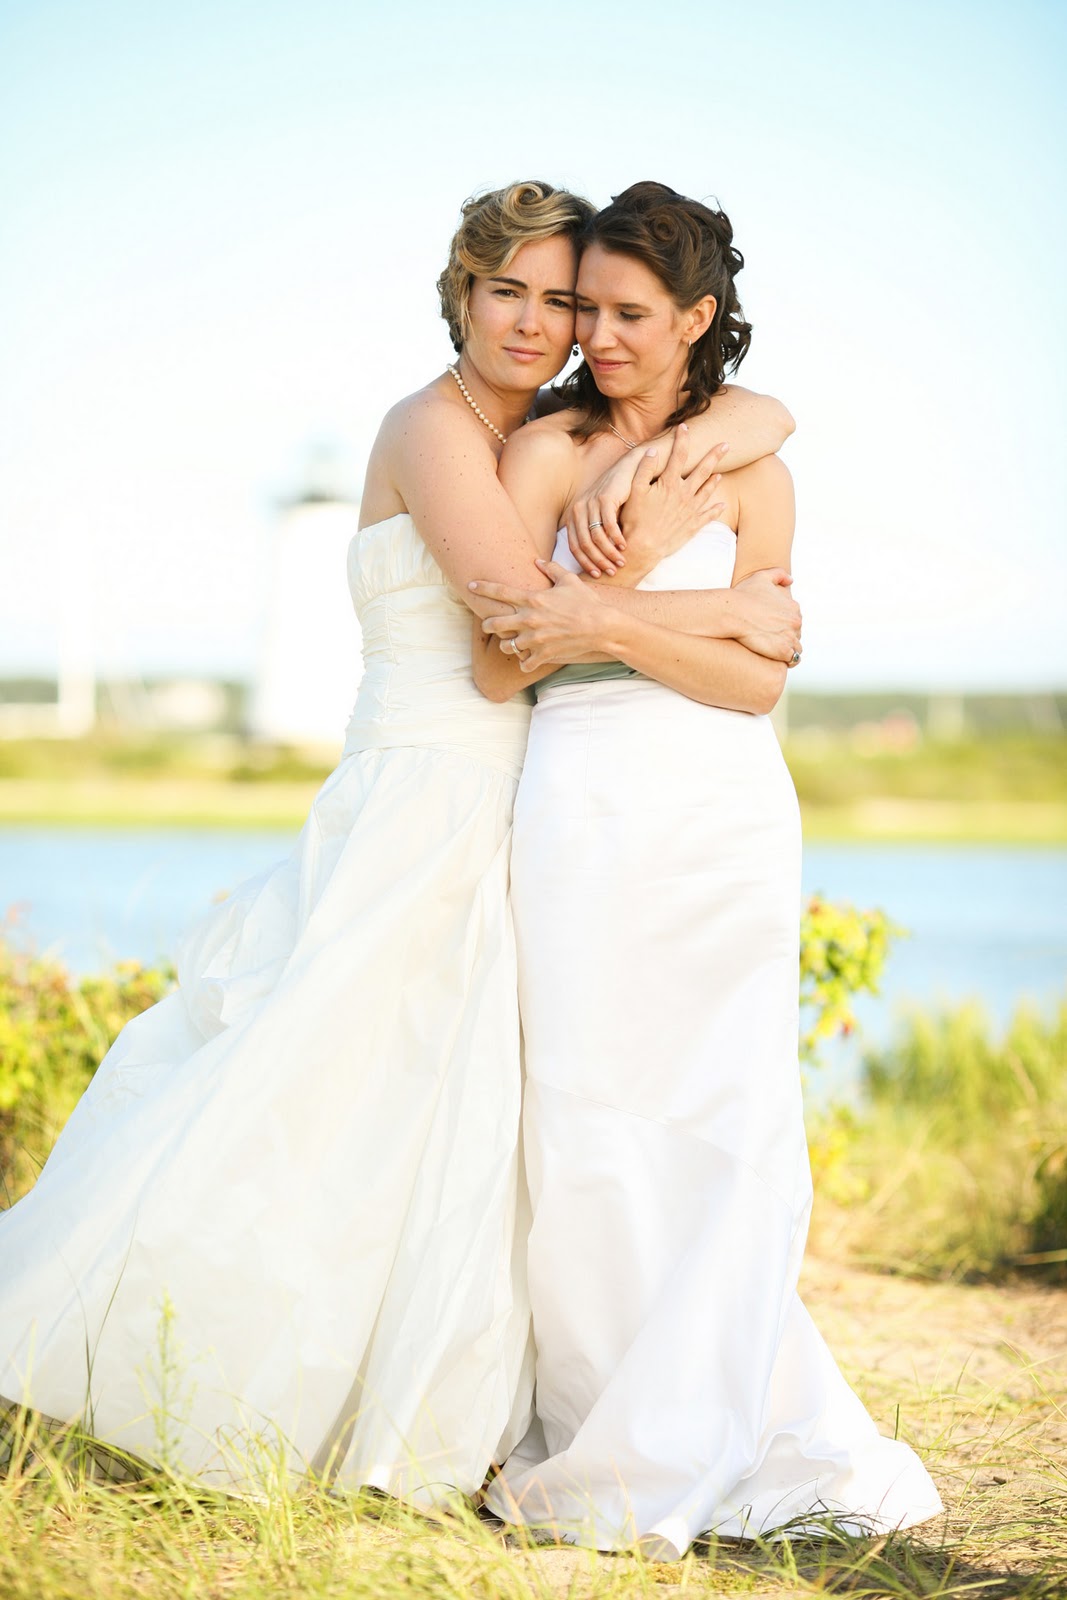 Lesbian Weddings Pictures 76